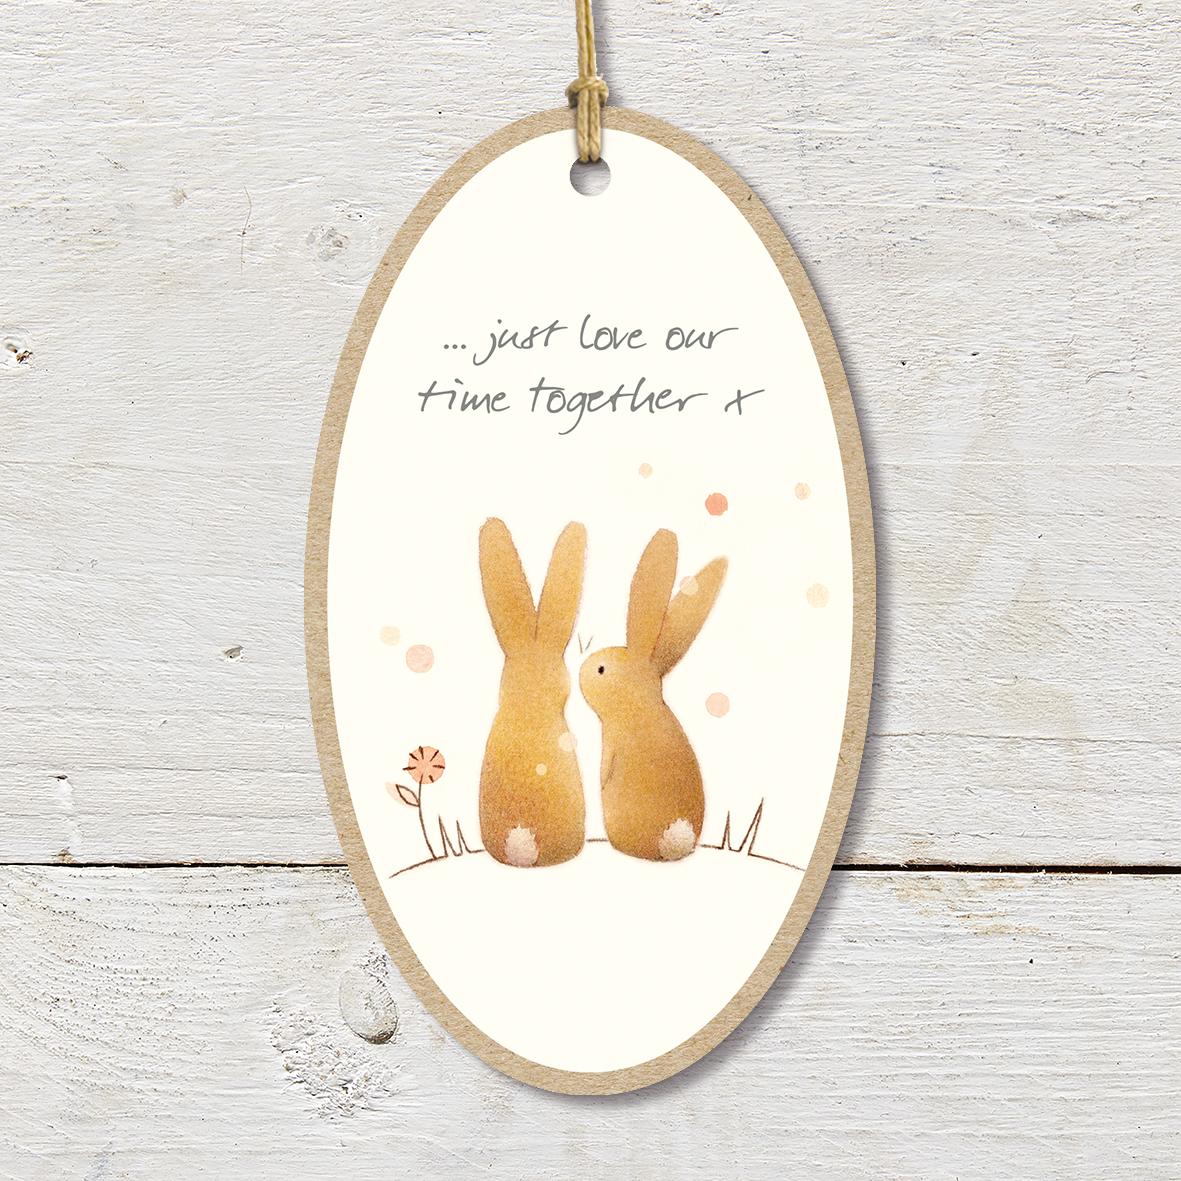 Large Wooden Plaque featuring two cute rabbits with a ’Just love our time together’ caption.